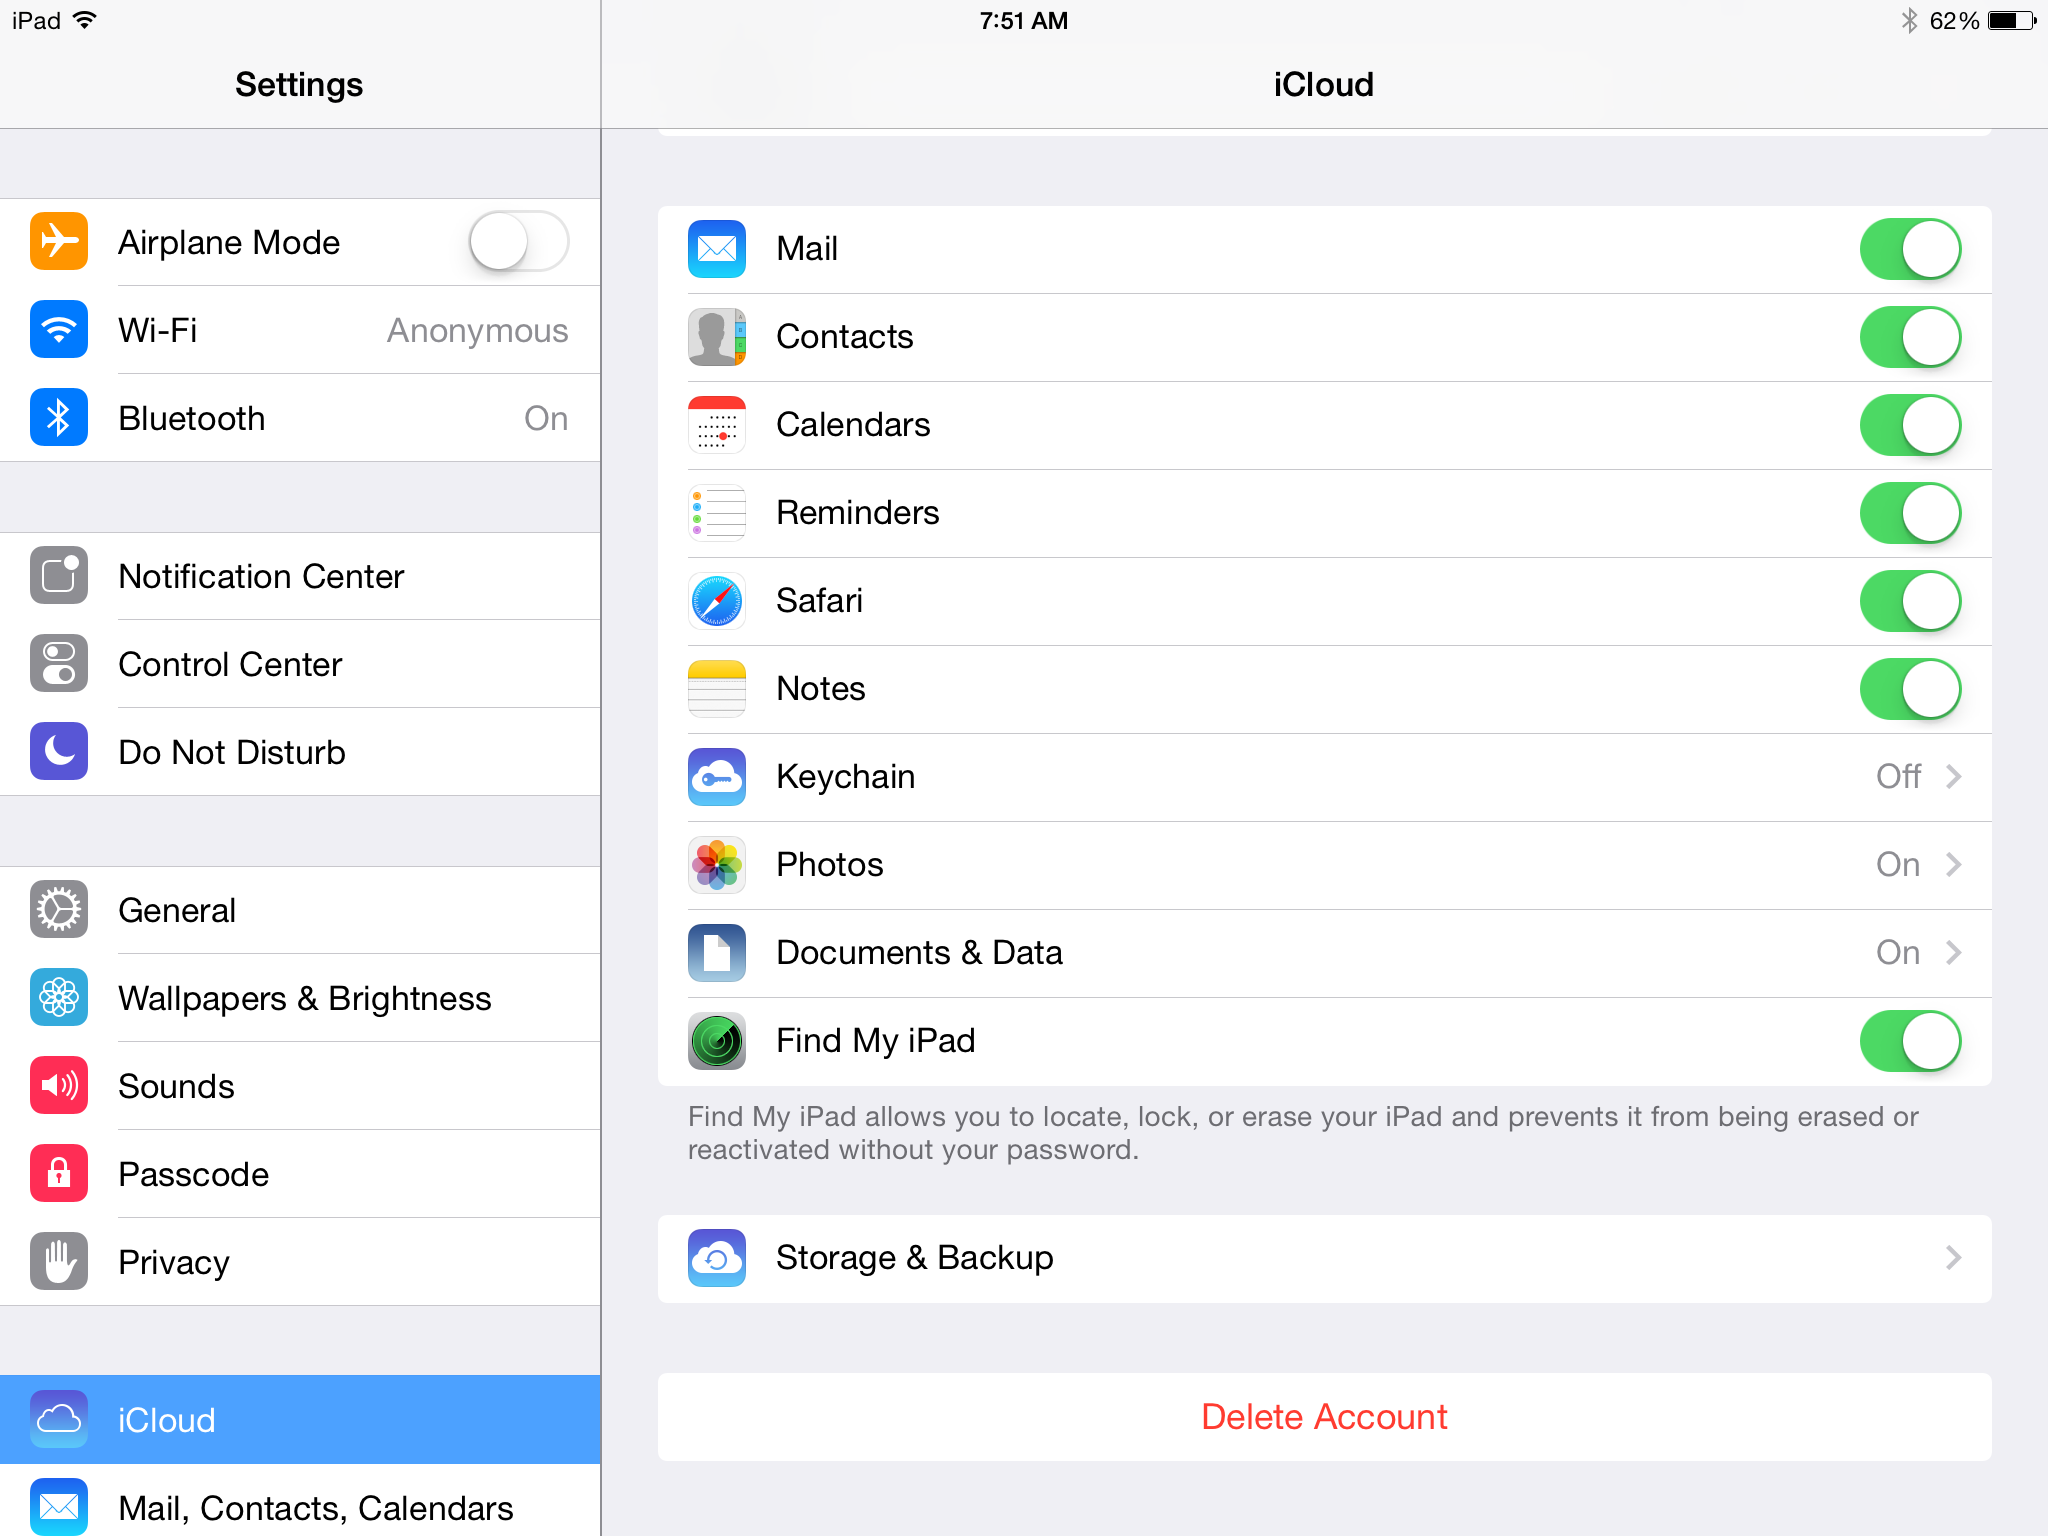 How-to: Safely delete or change an iCloud account from your Mac or iOS device - 9to5Mac